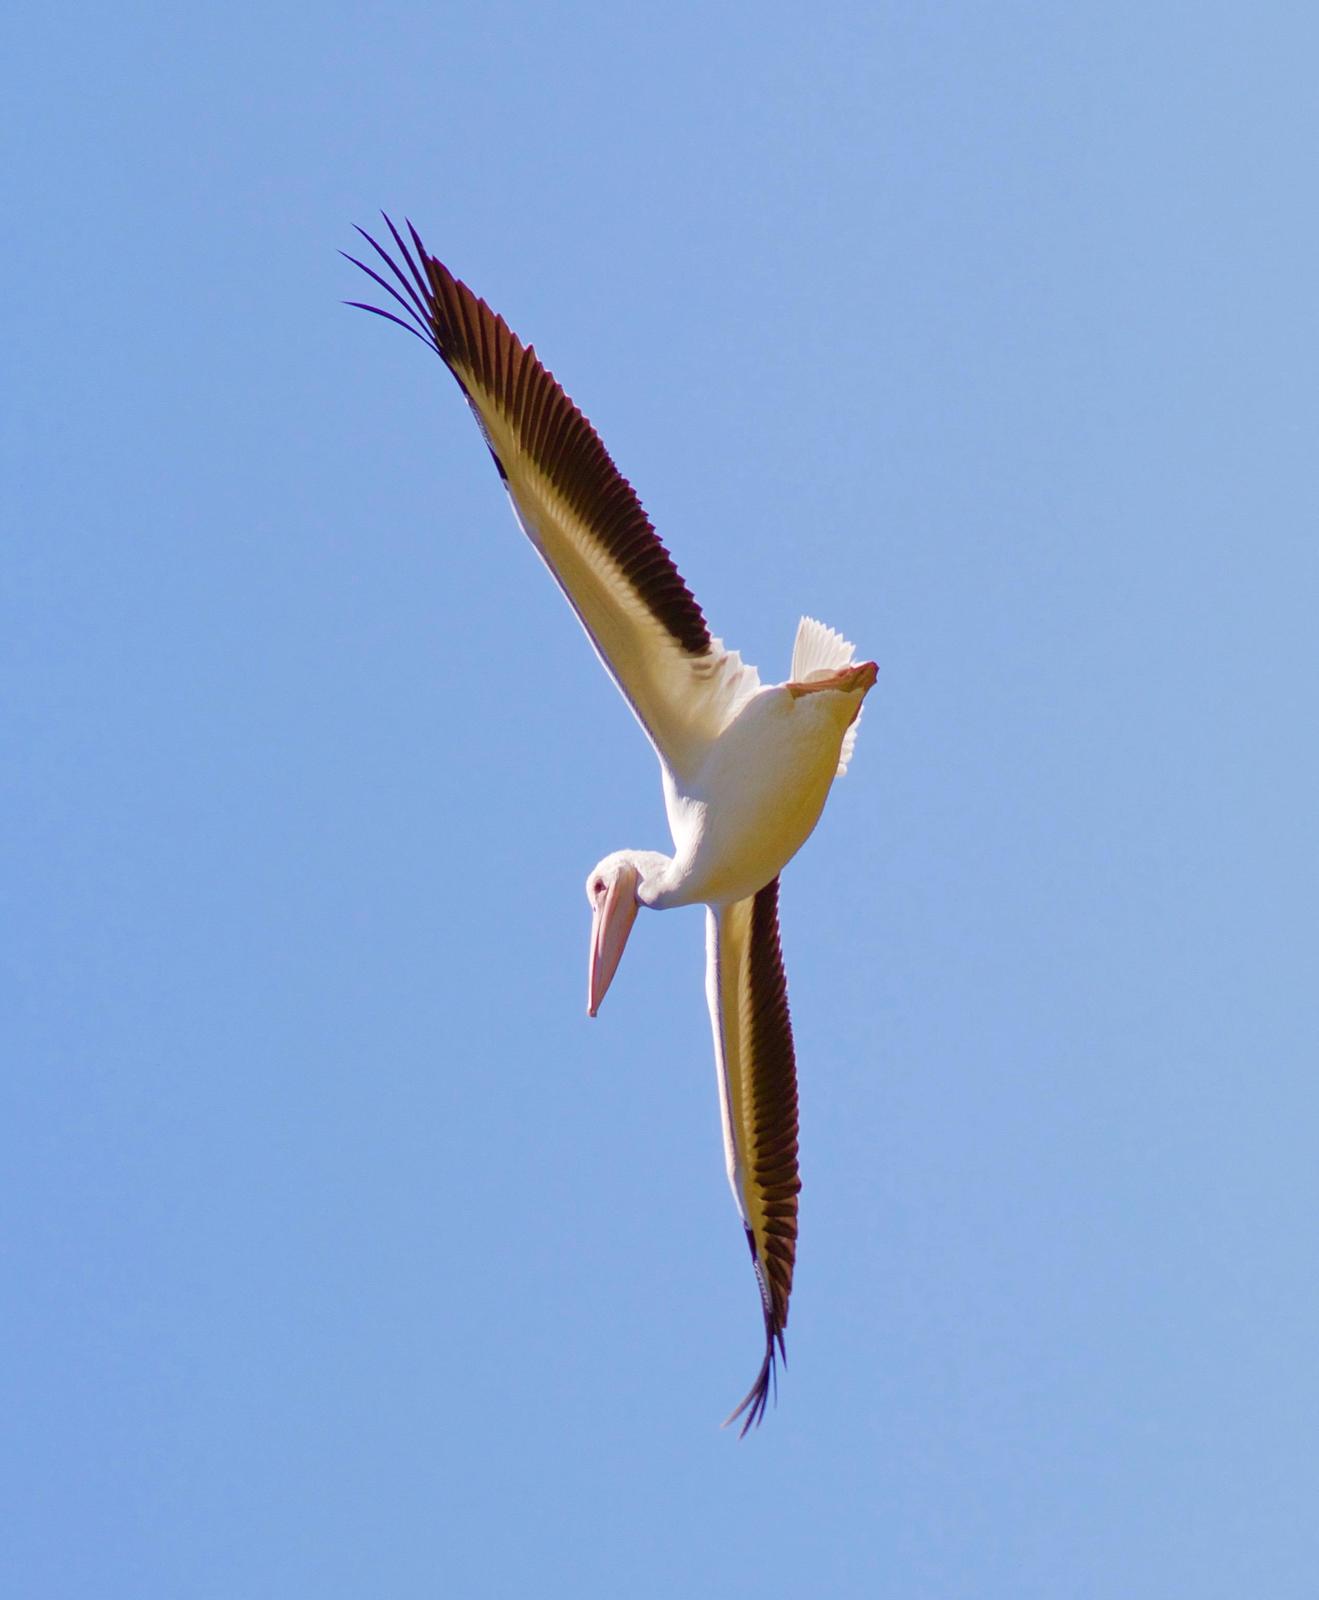 American White Pelican Photo by Kathryn Keith